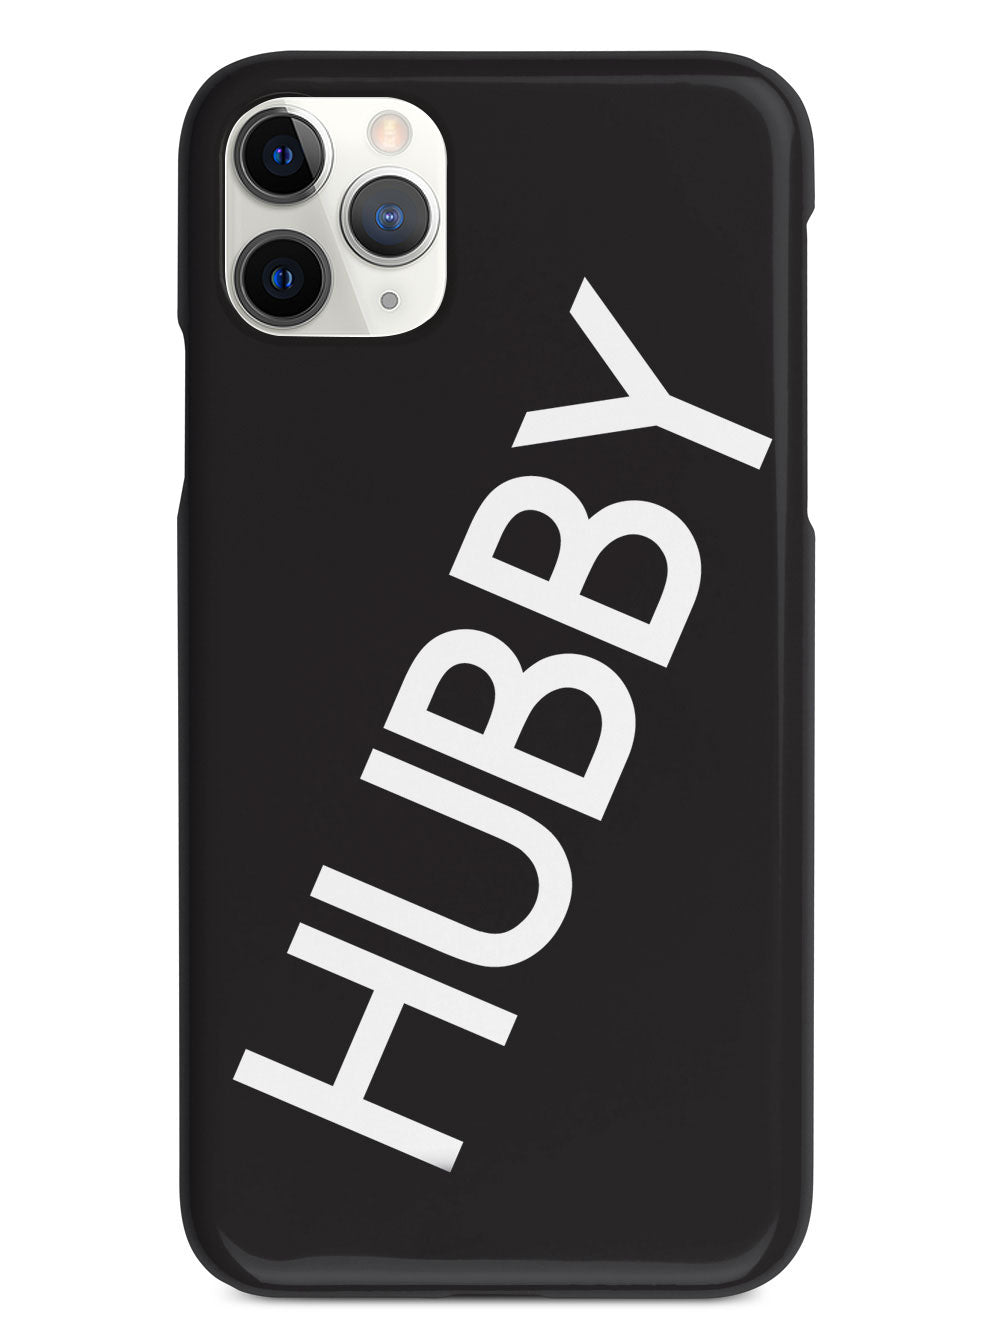 Hubby and Wifey - Hubby Case